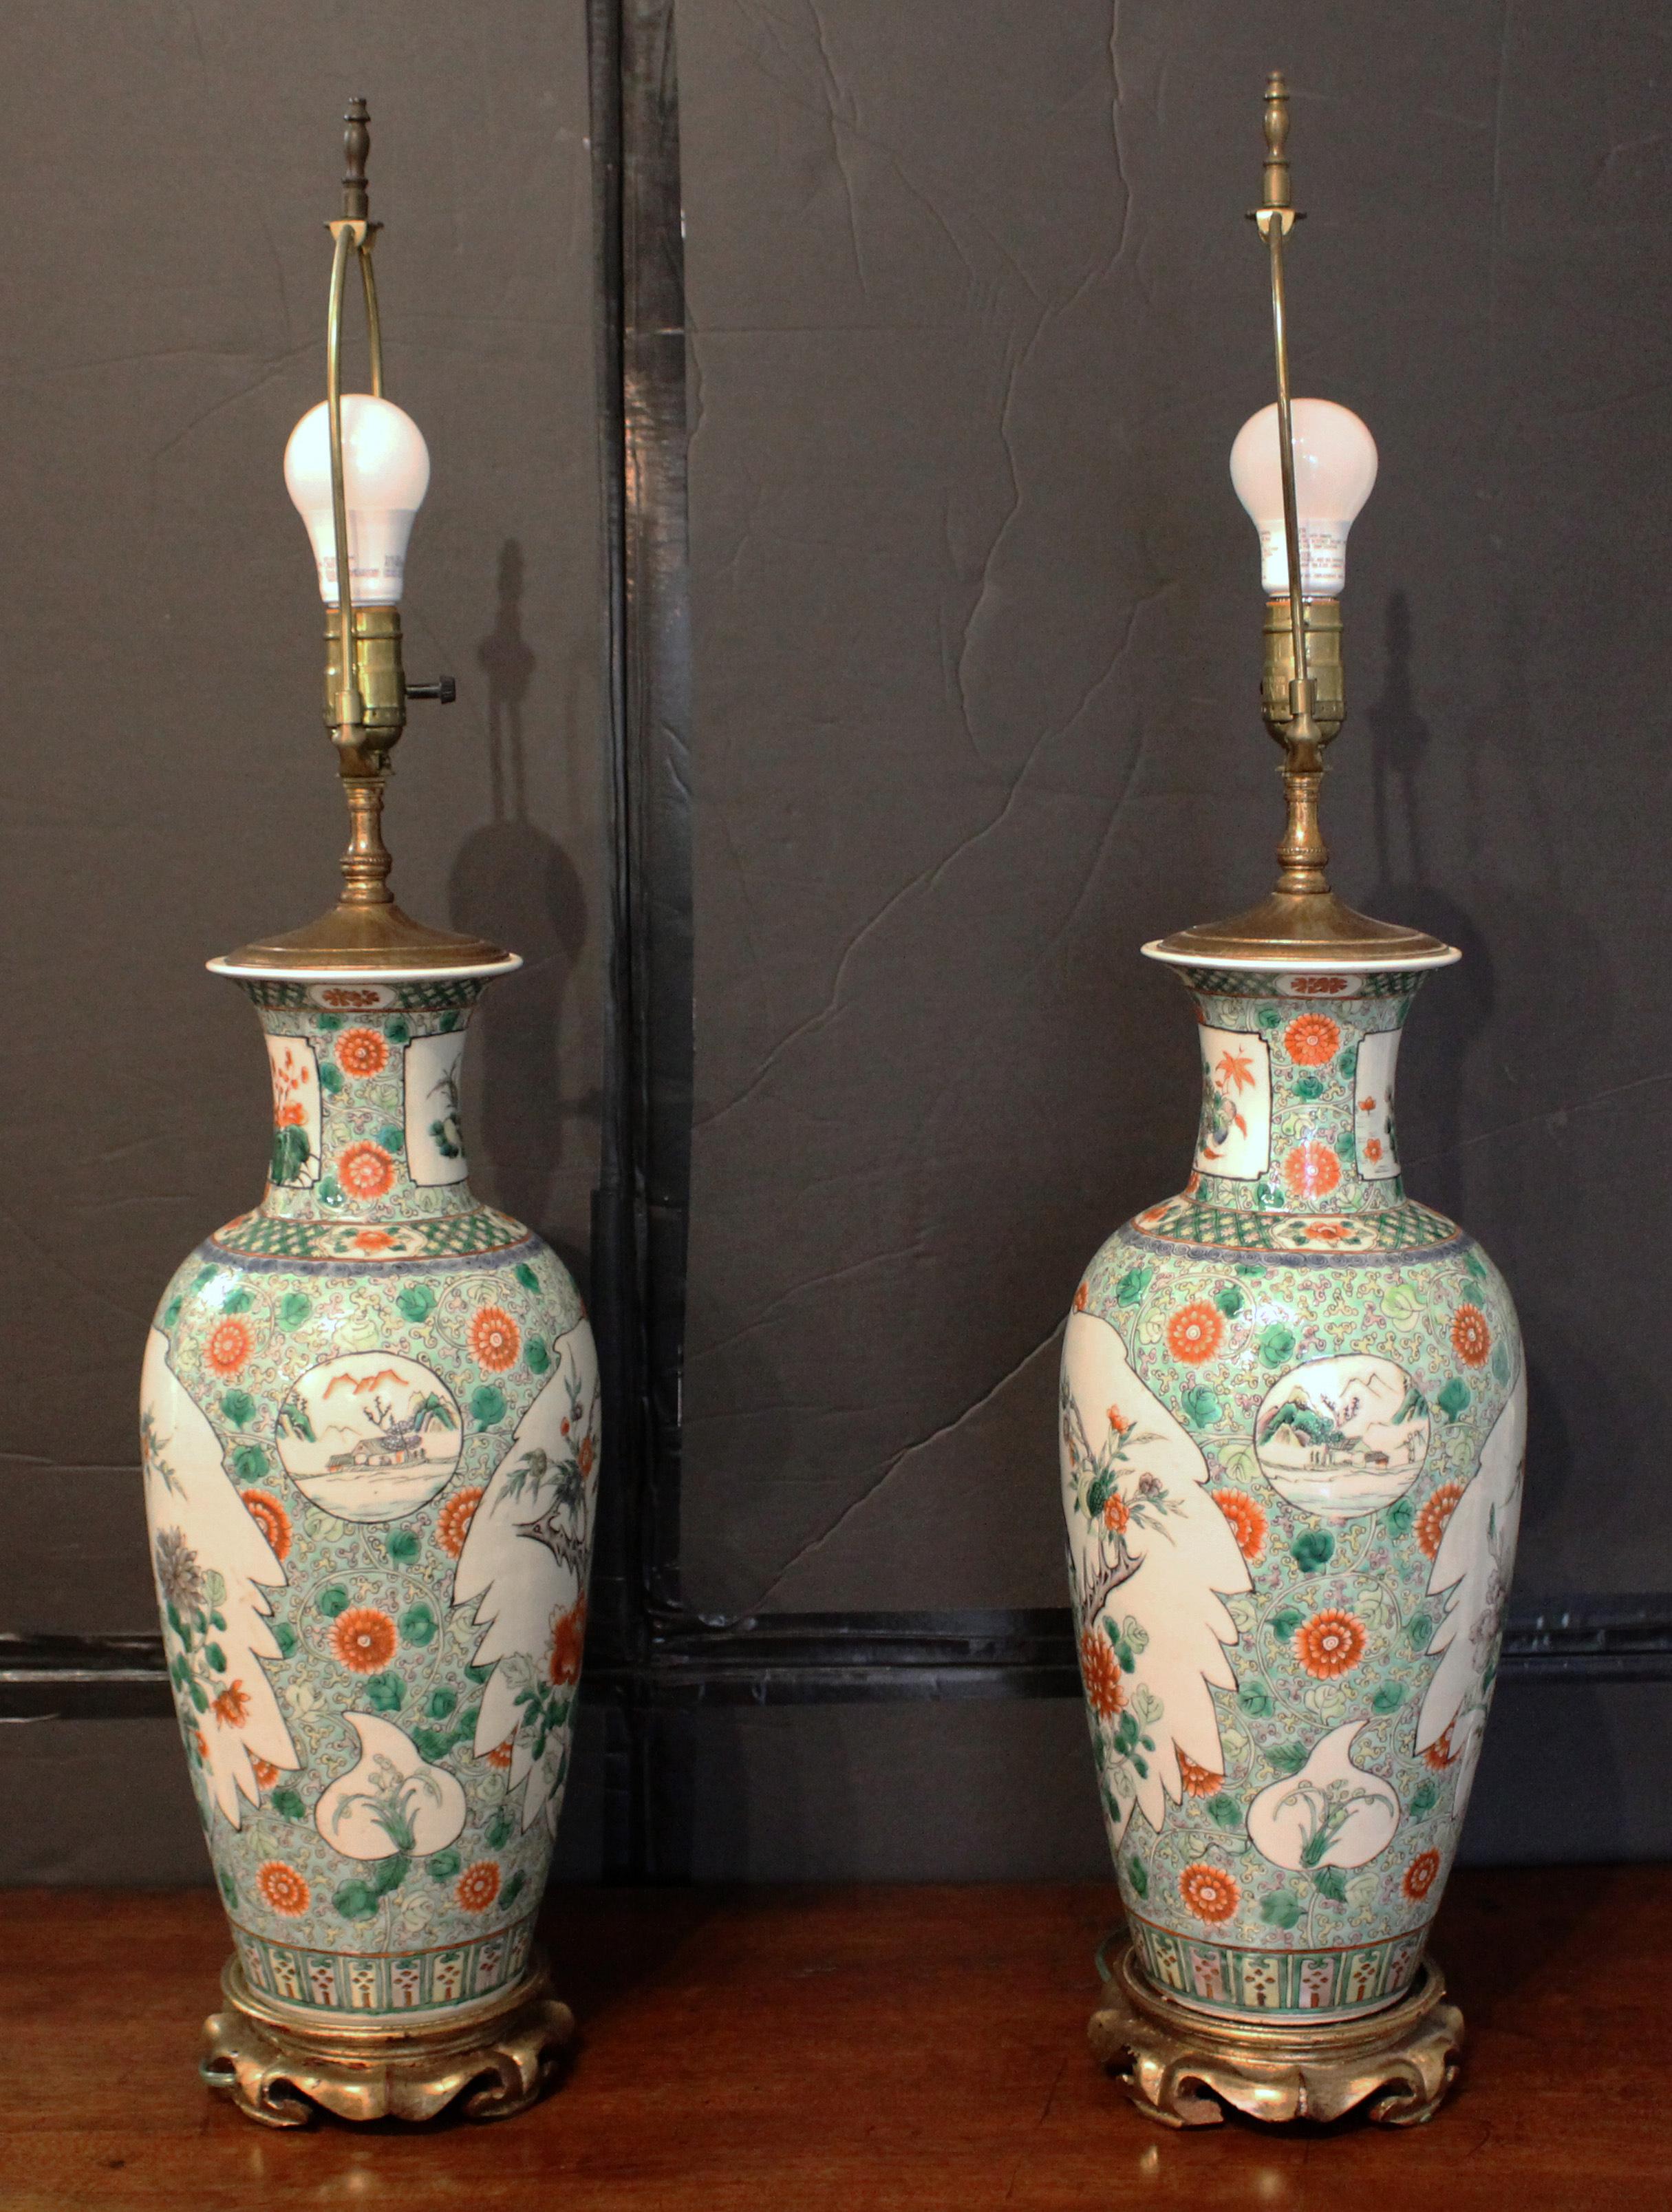 Late 19th century pair of Chinese export famille verte vases, now lamps. Carved & gilt wood bases. Decorated with small & large lozenges of birds, landscaped & fish. Both rims with minor old restorations. Qing dynasty.
25.5